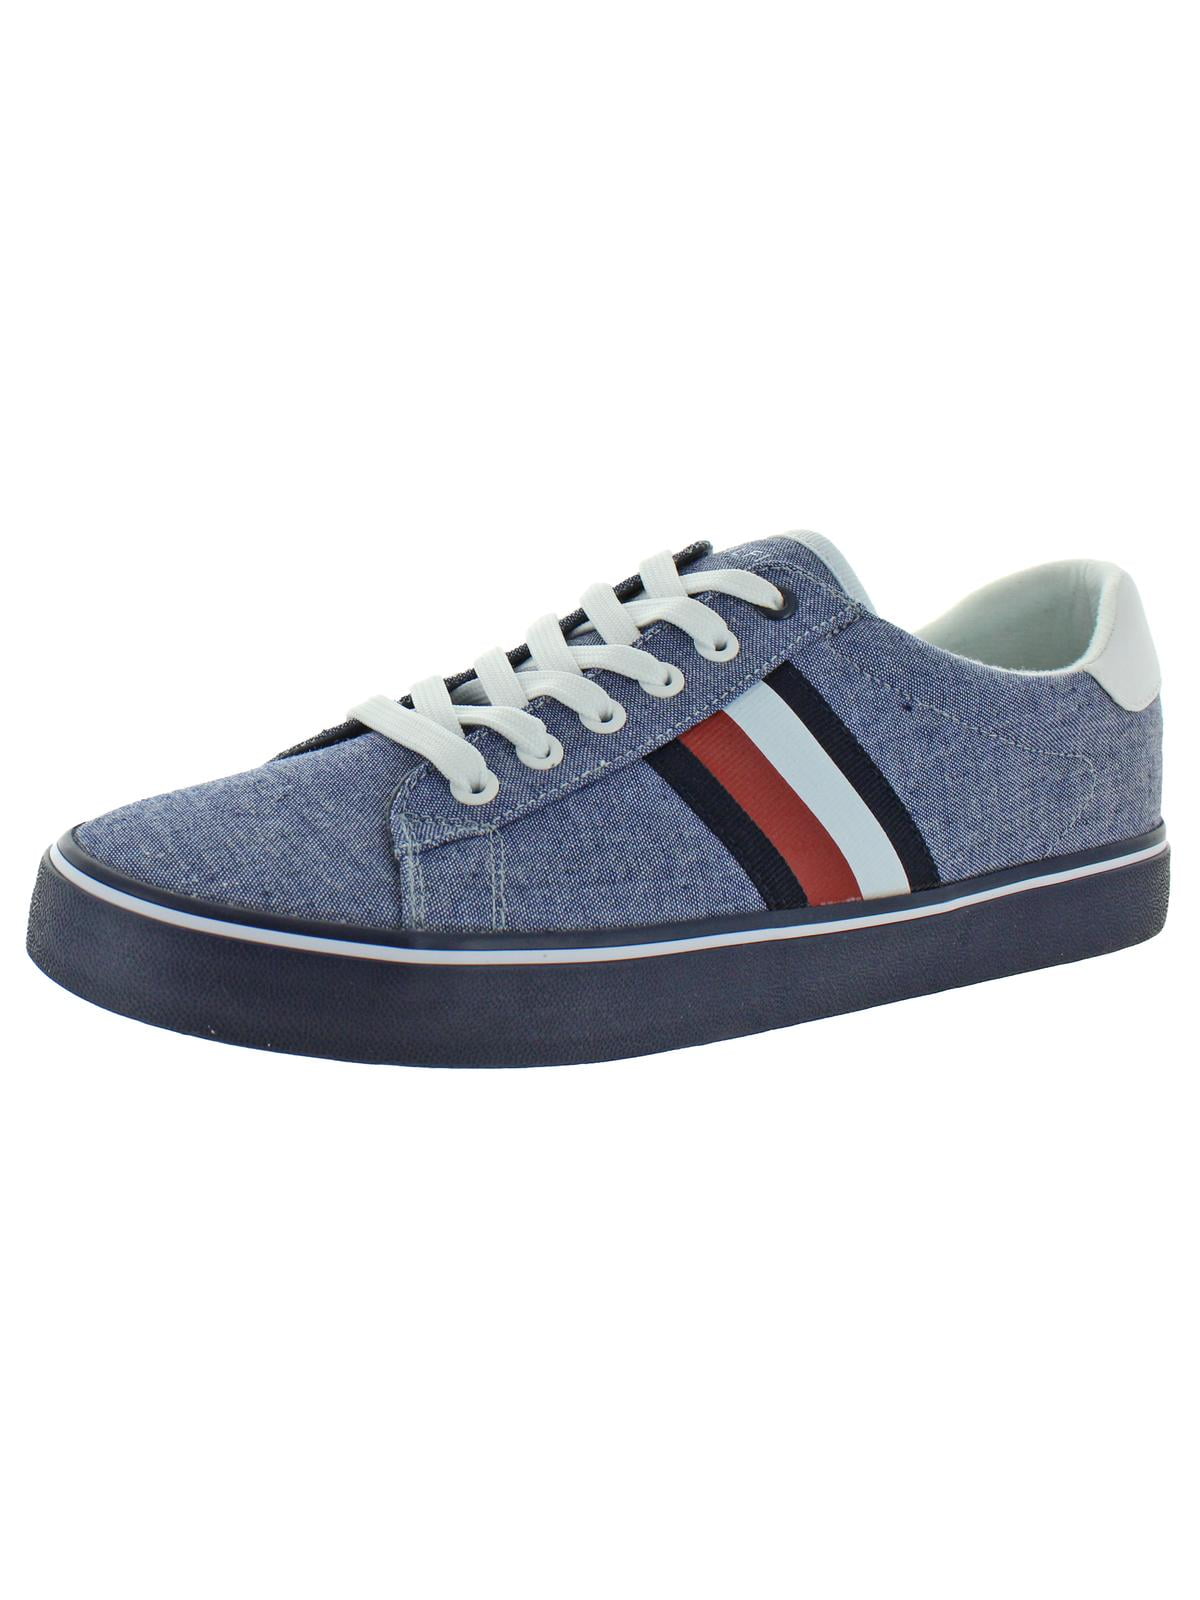 Tommy Hilfiger Mens Paris 3 Logo Padded Insole Sneakers Blue 12 Medium ...